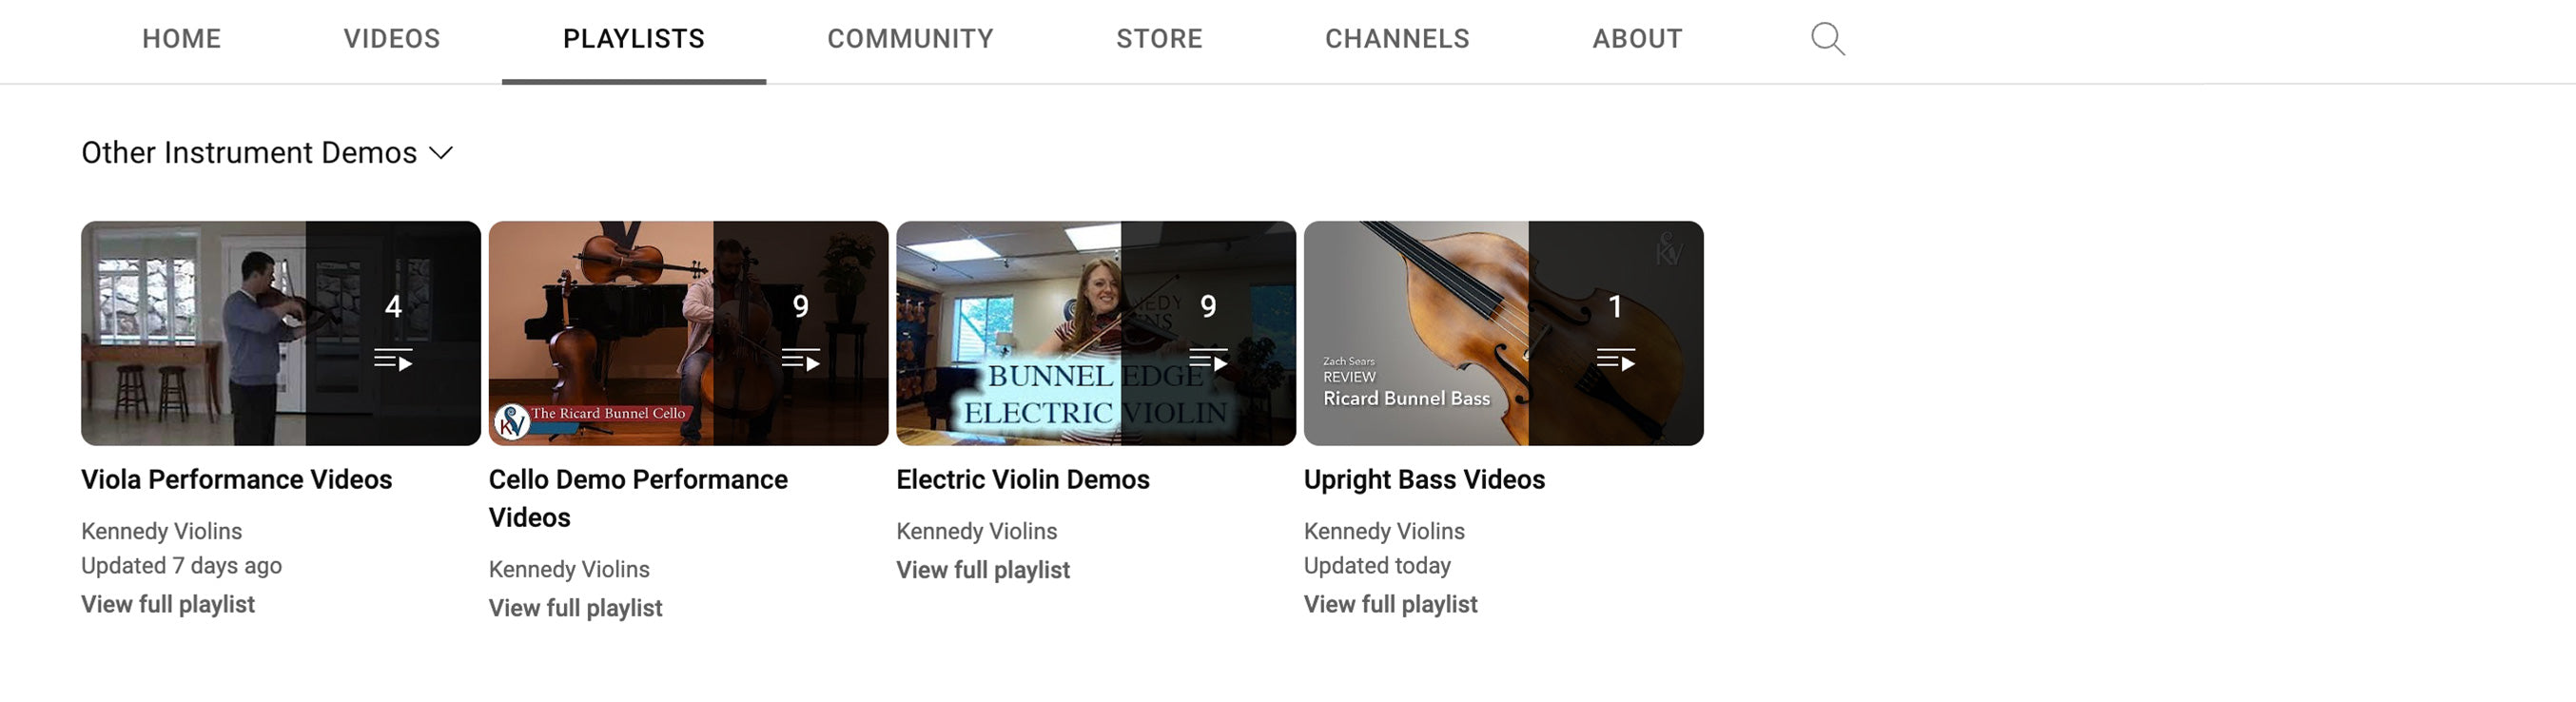 Other Instrument Demos — Viola, Cello, Electric Violin, Upright bass